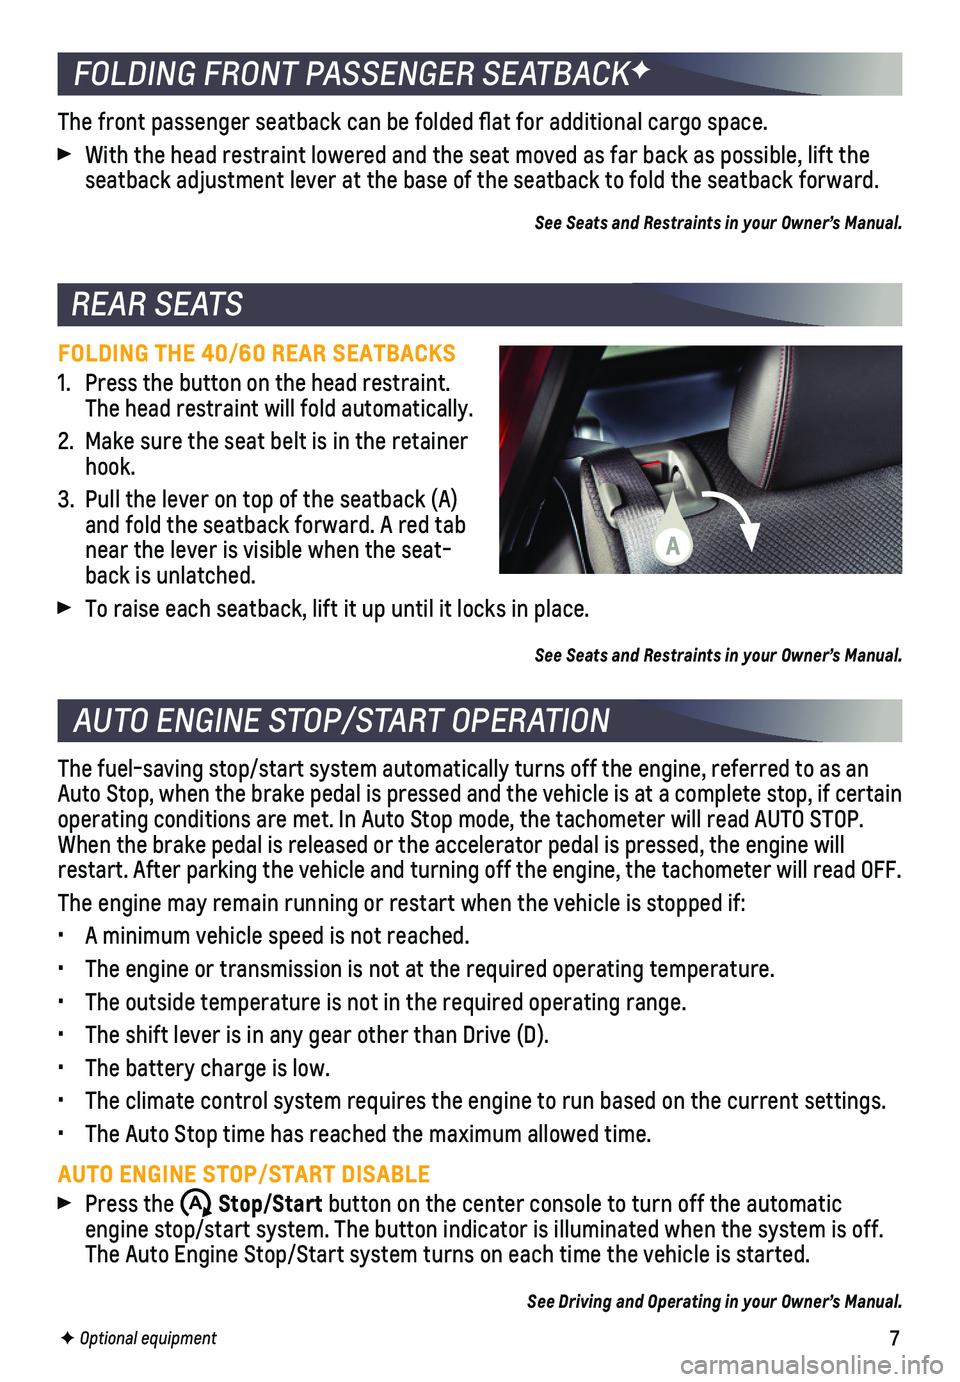 CHEVROLET TRAILBLAZER 2021  Get To Know Guide 7F Optional equipment  
REAR SEATS
FOLDING THE 40/60 REAR SEATBACKS
1. Press the button on the head restraint. The head restraint will fold automatically. 
2. Make sure the seat belt is in the retaine